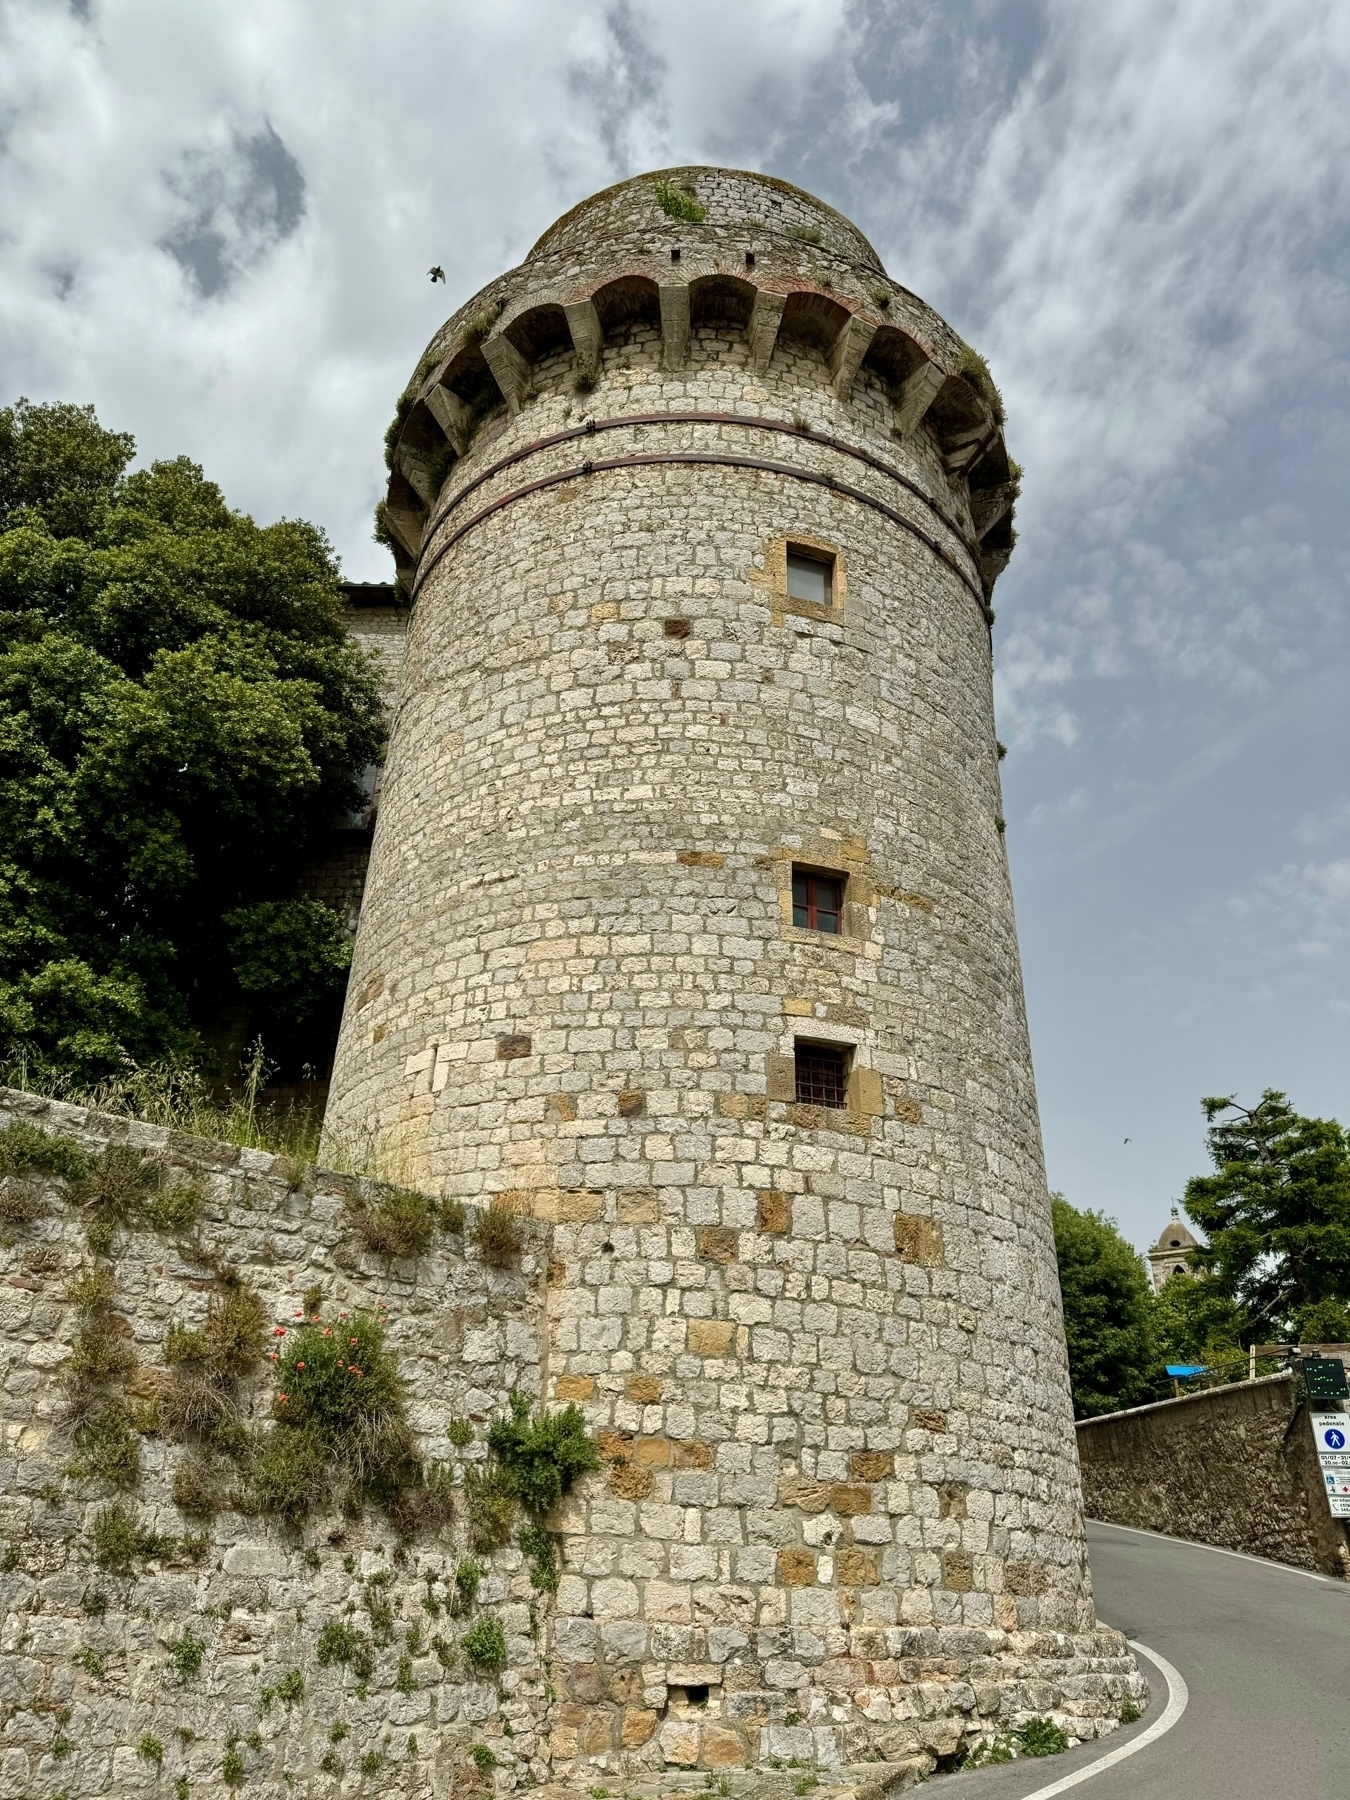 A medieval stone tower with a cylindrical shape, featuring small windows, a conical roof, and an overhanging battlement. The tower is situated next to a winding road with trees and vegetation nearby. A partly cloudy sky is visible in the background. 